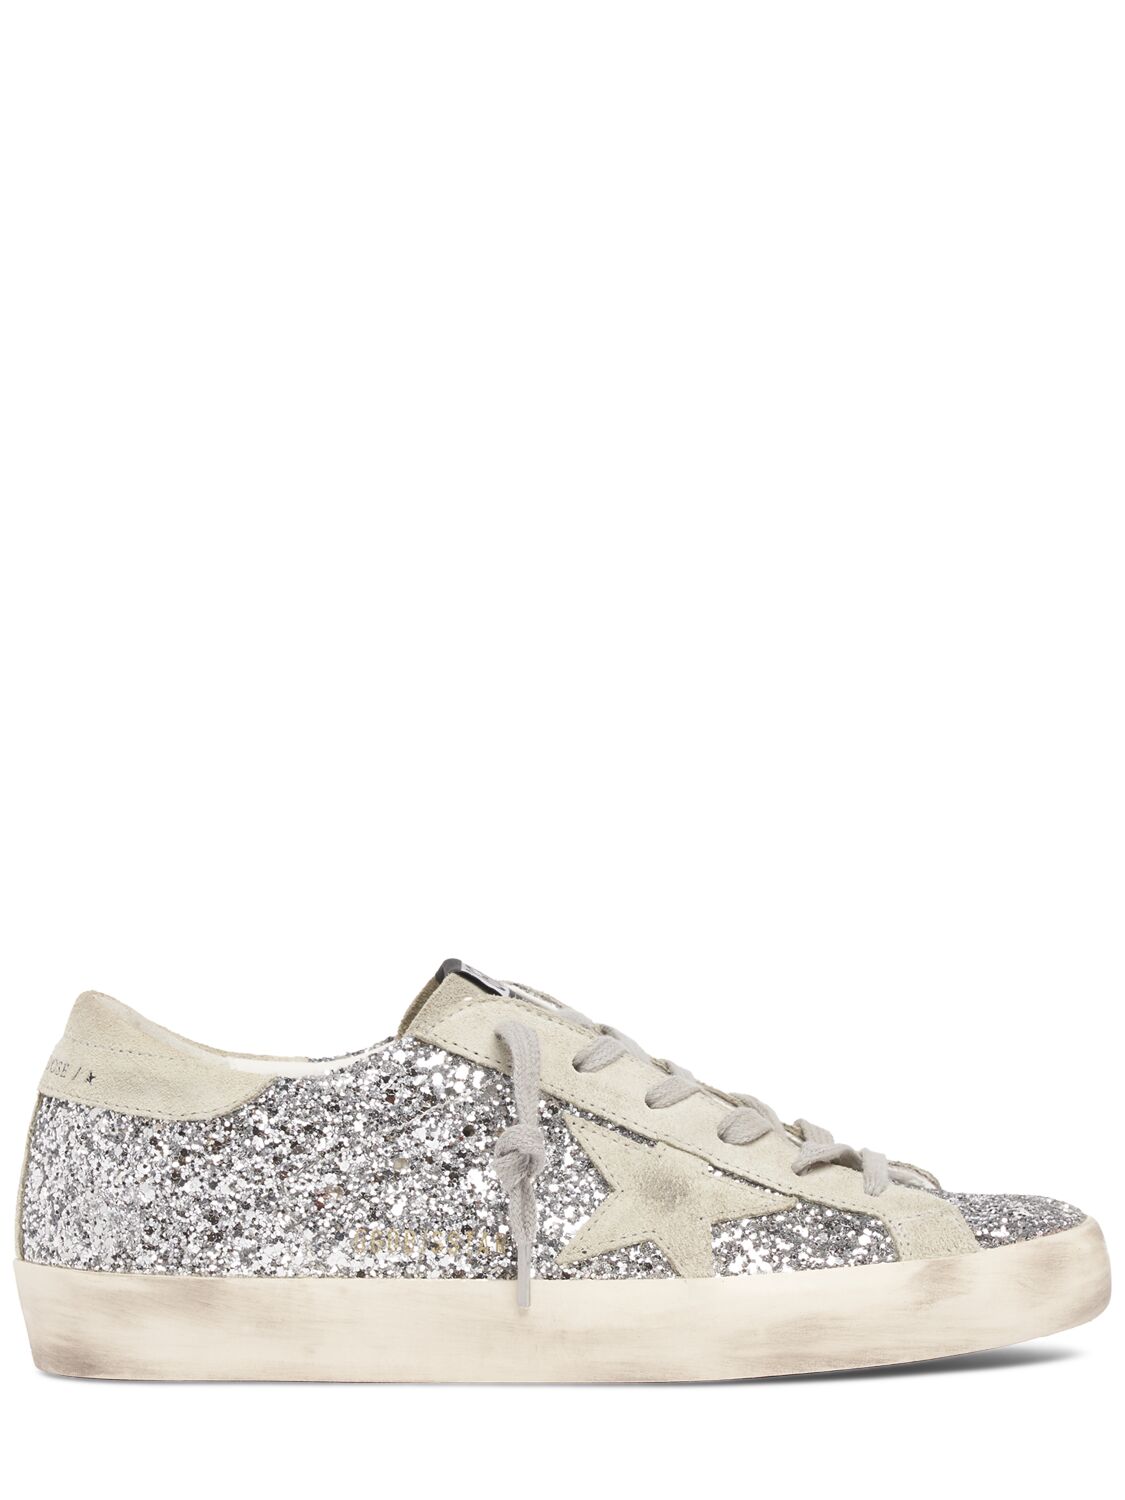 Golden Goose 20mm Super-star Glittered Sneakers In Silver,ice